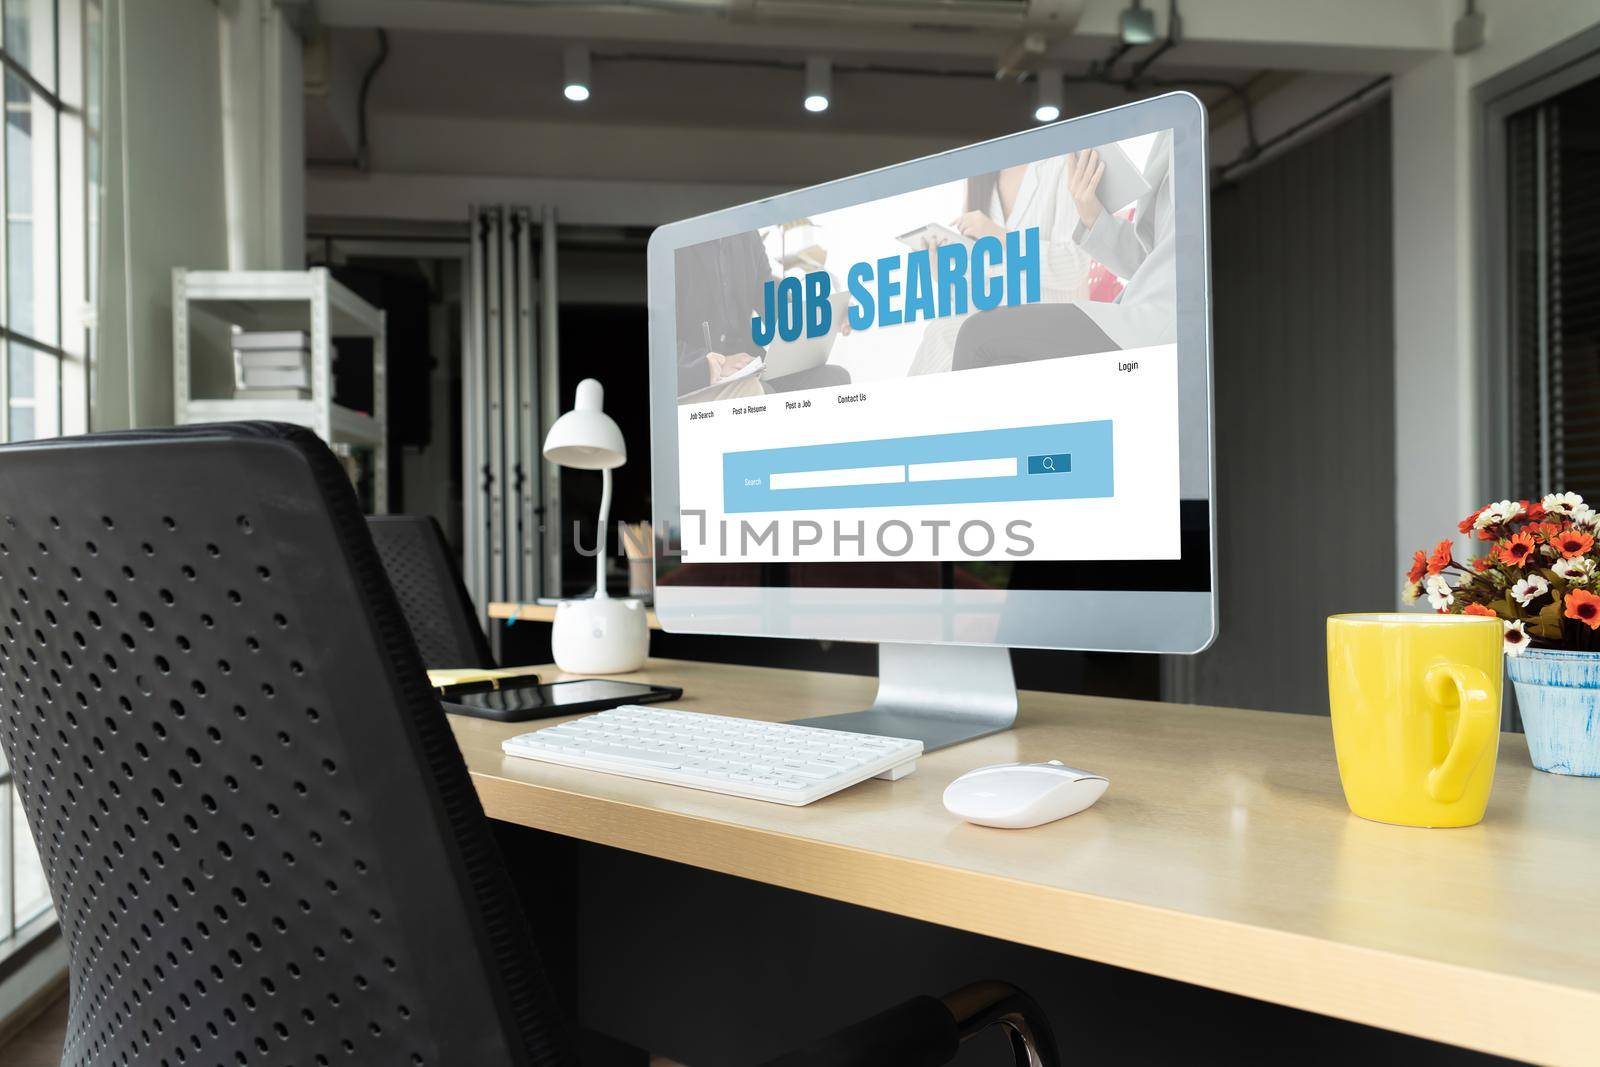 Online job search on modish website for worker to search for job opportunities by biancoblue